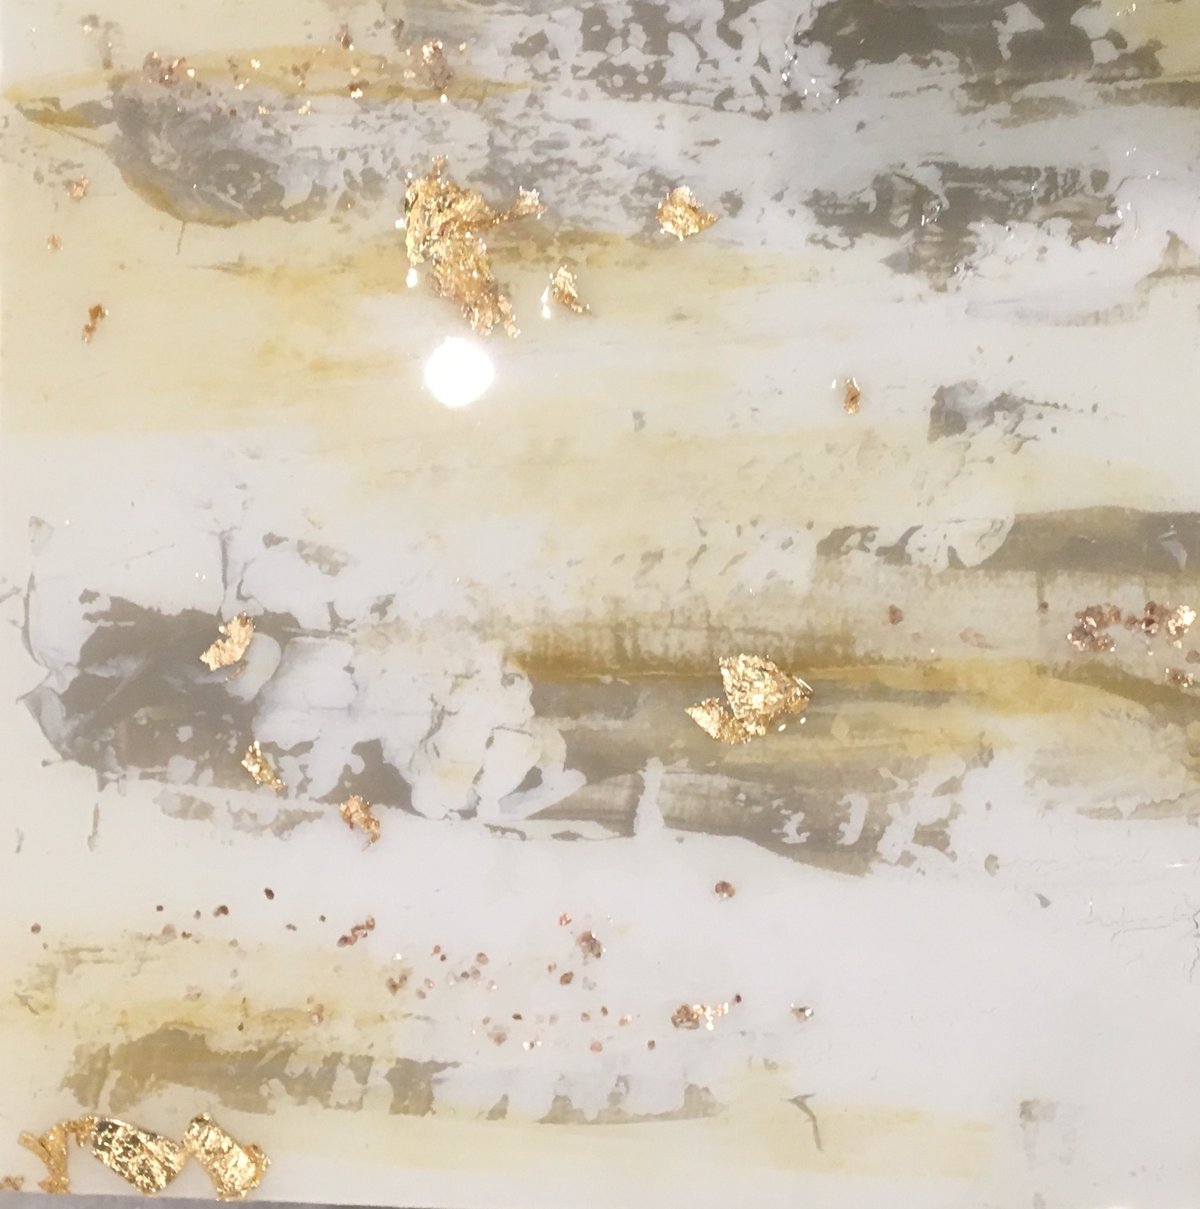 Abstract with gold leaf | FRED COX FINE ART